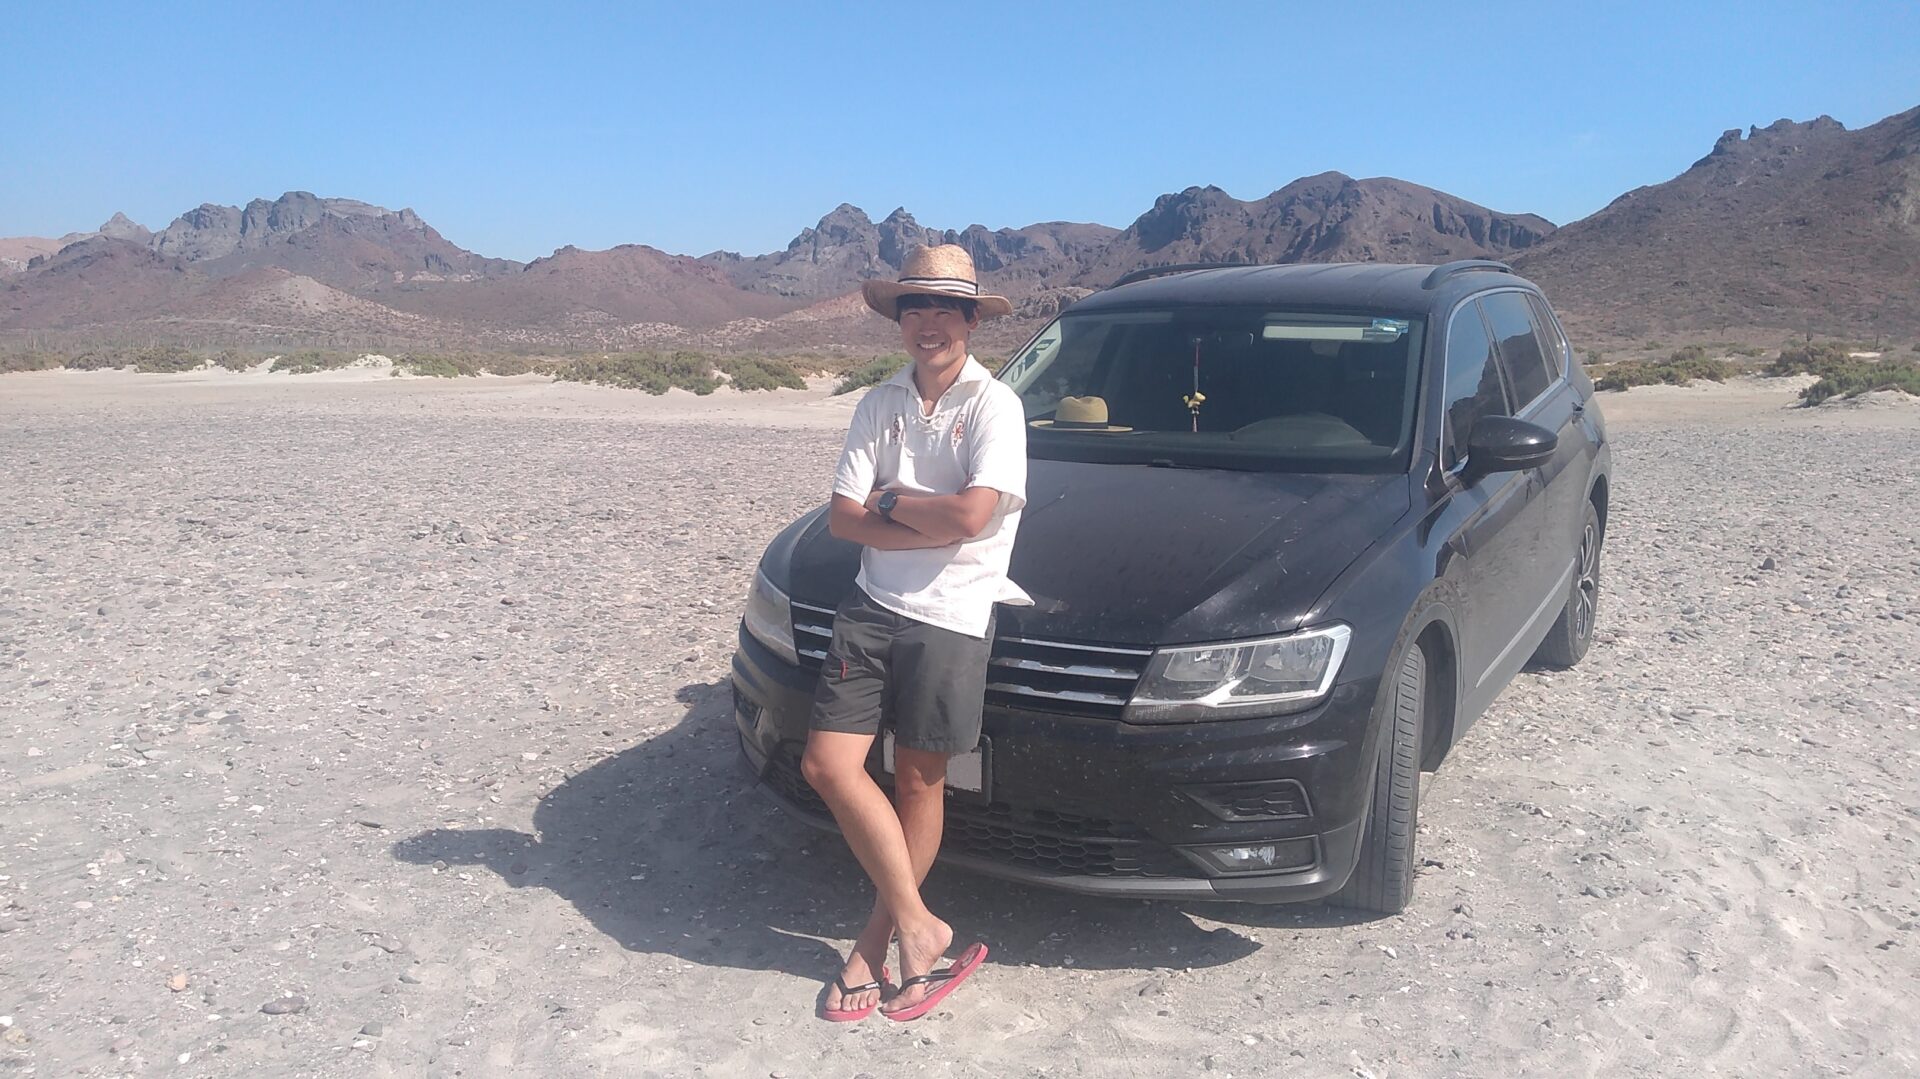 Mexican tourist guide Isao Iwasaki stands with his arms crossed in front of a car in La Paz